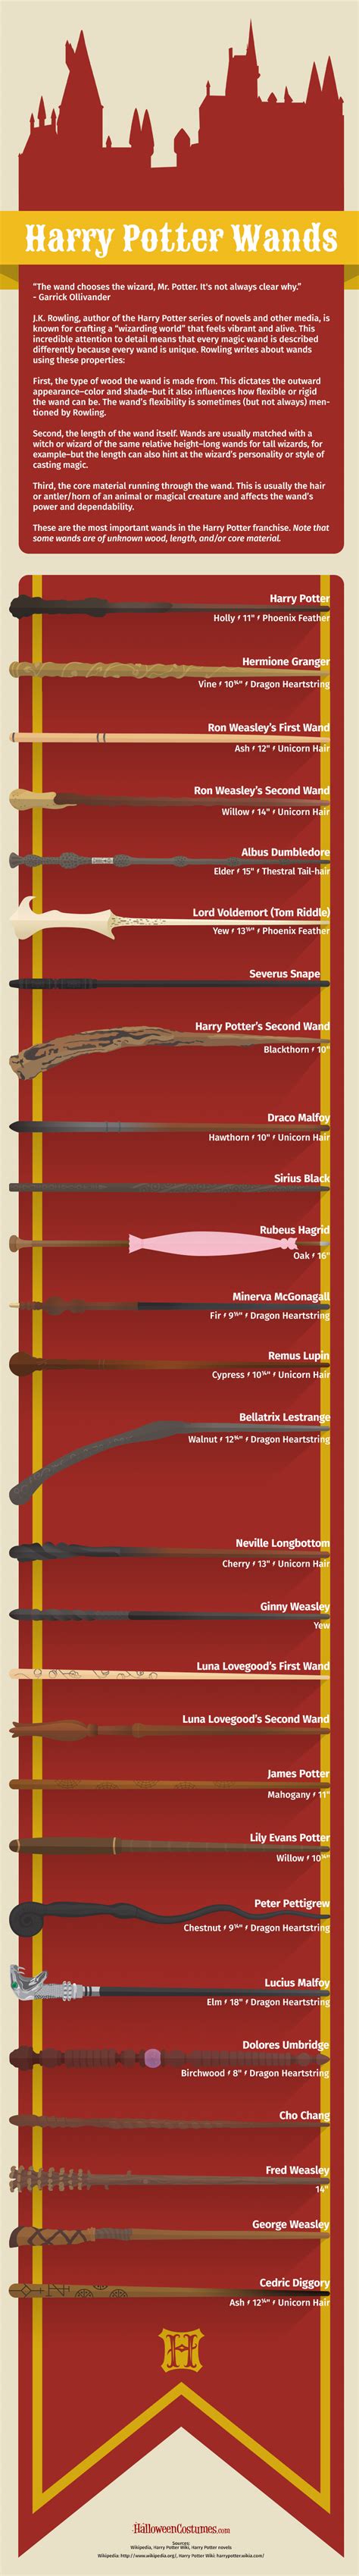 This Harry Potter Infographic Showcases All The Incredible Wands From